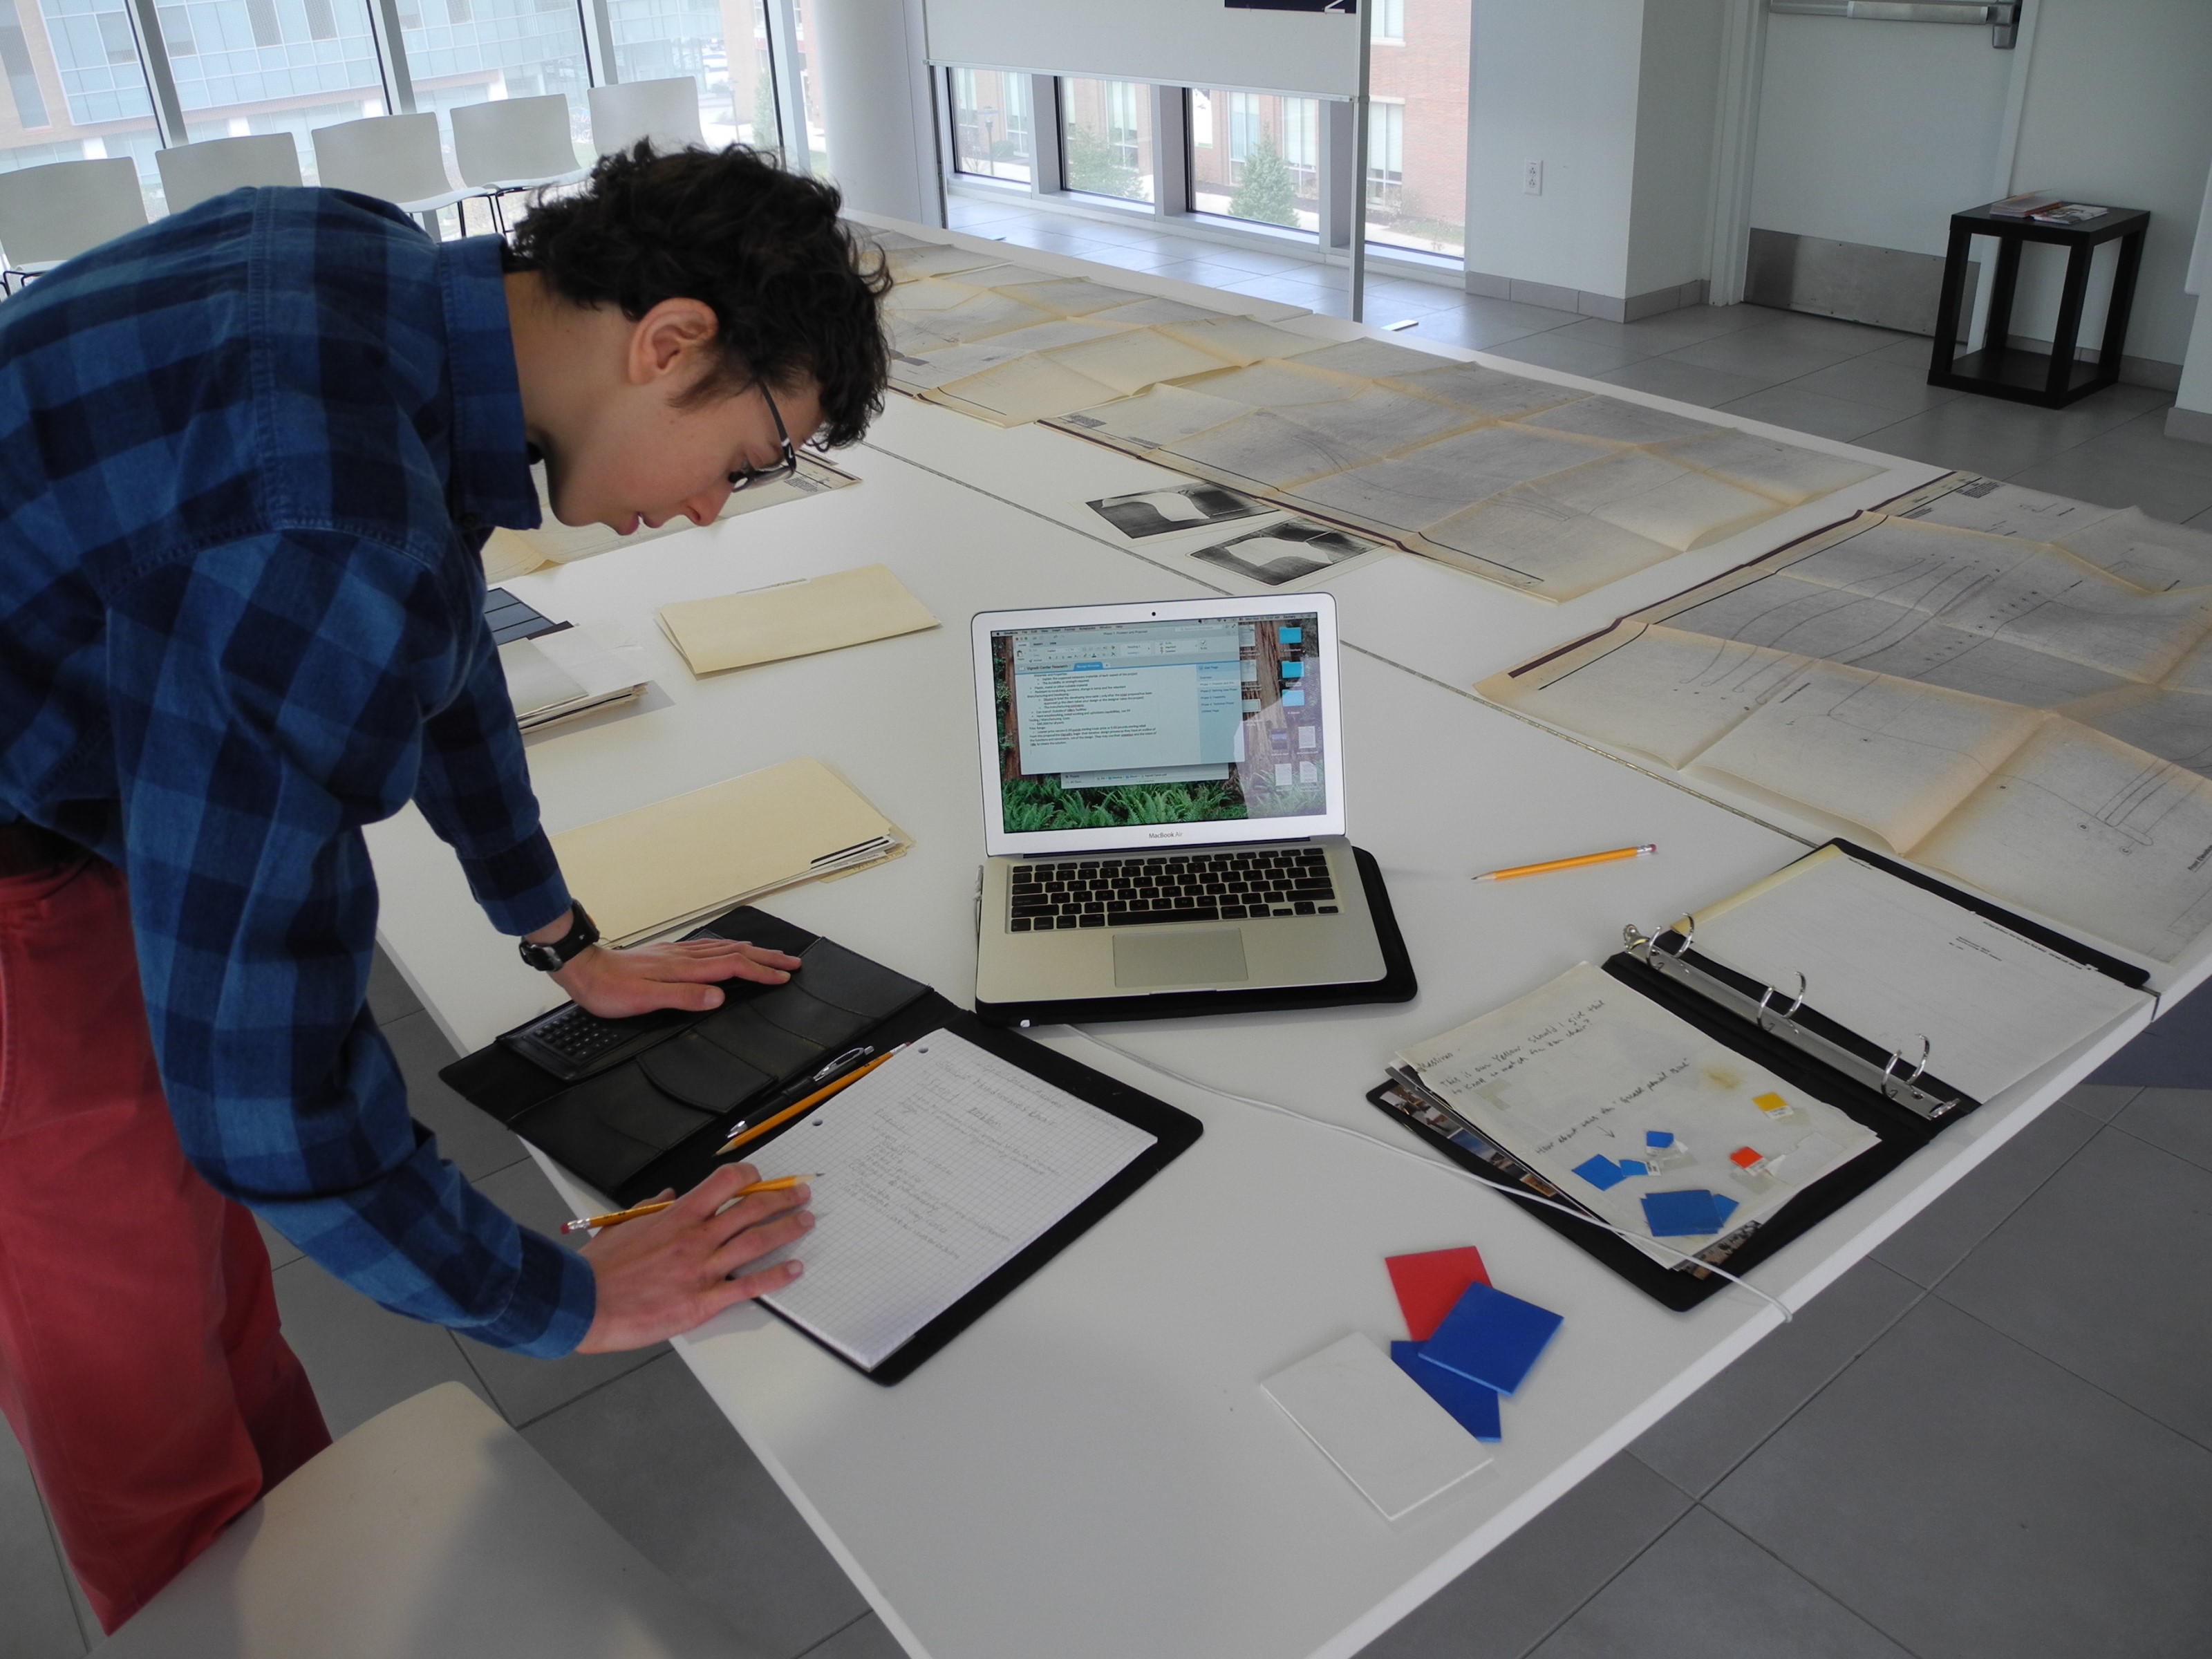 Anglemyer leaning over a desk in the Vignelli Center doing work